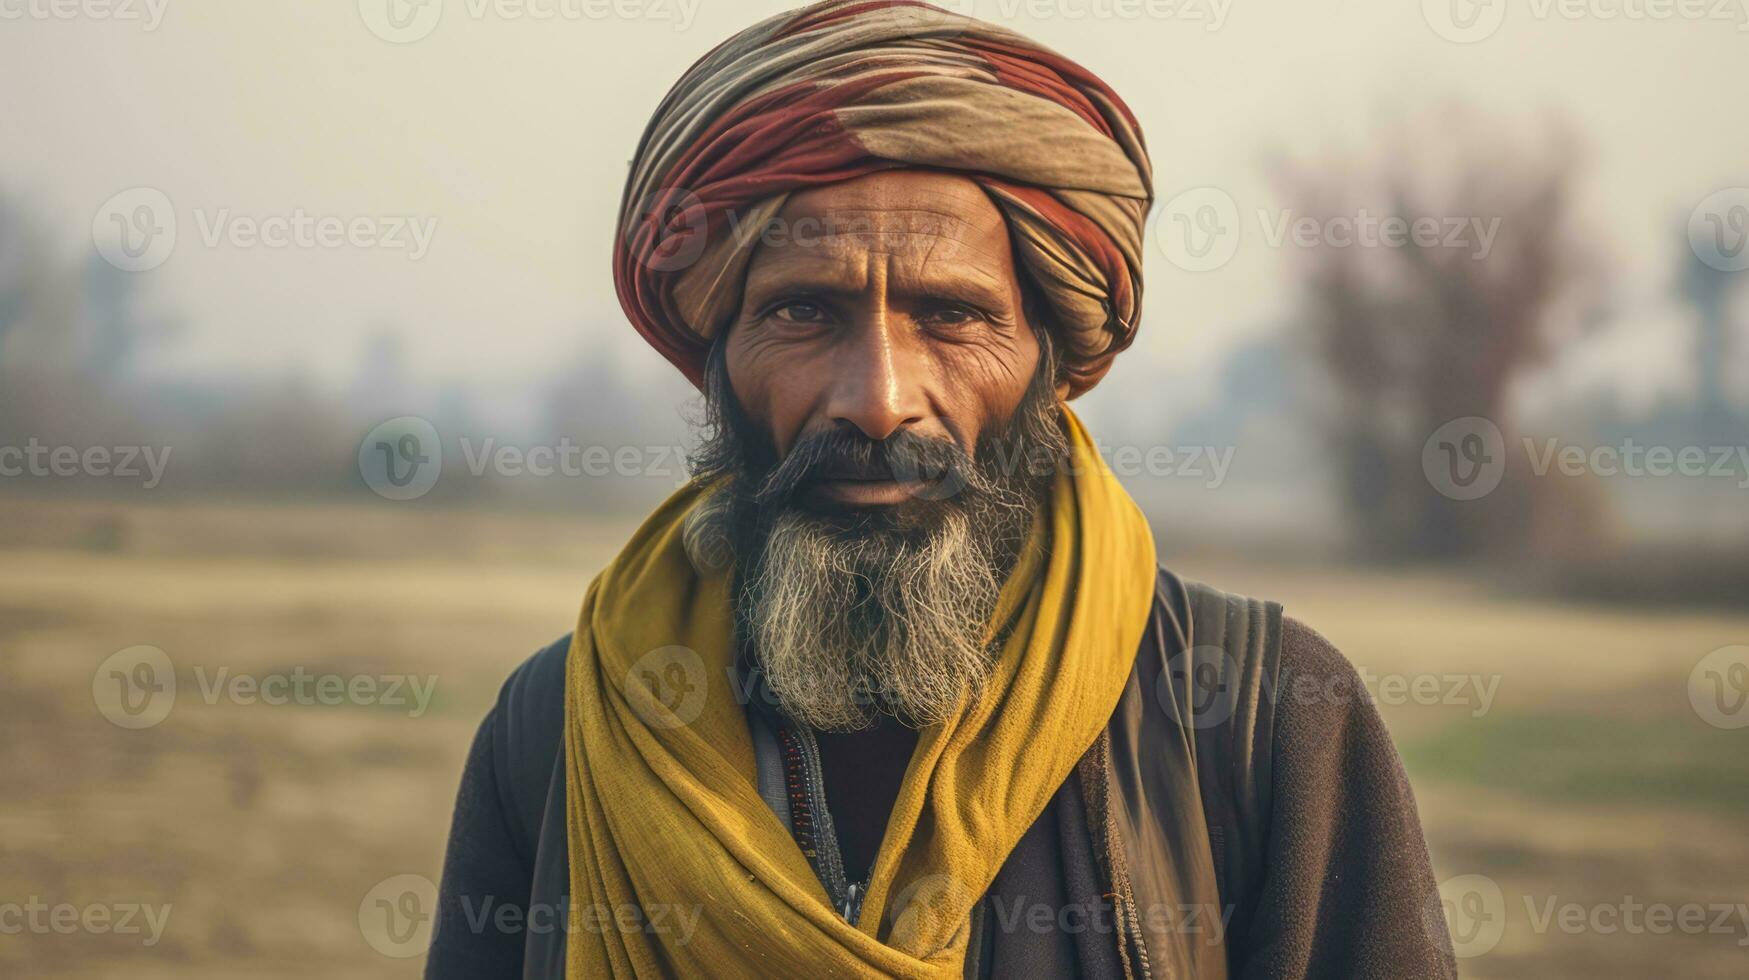 AI generated a man with a beard and a turban, who is standing in a spacious and open field. He appears to be looking into the camera. The man's unique appearance and outfit, coupled with the vast, empty background, create a striking visual portrait. photo